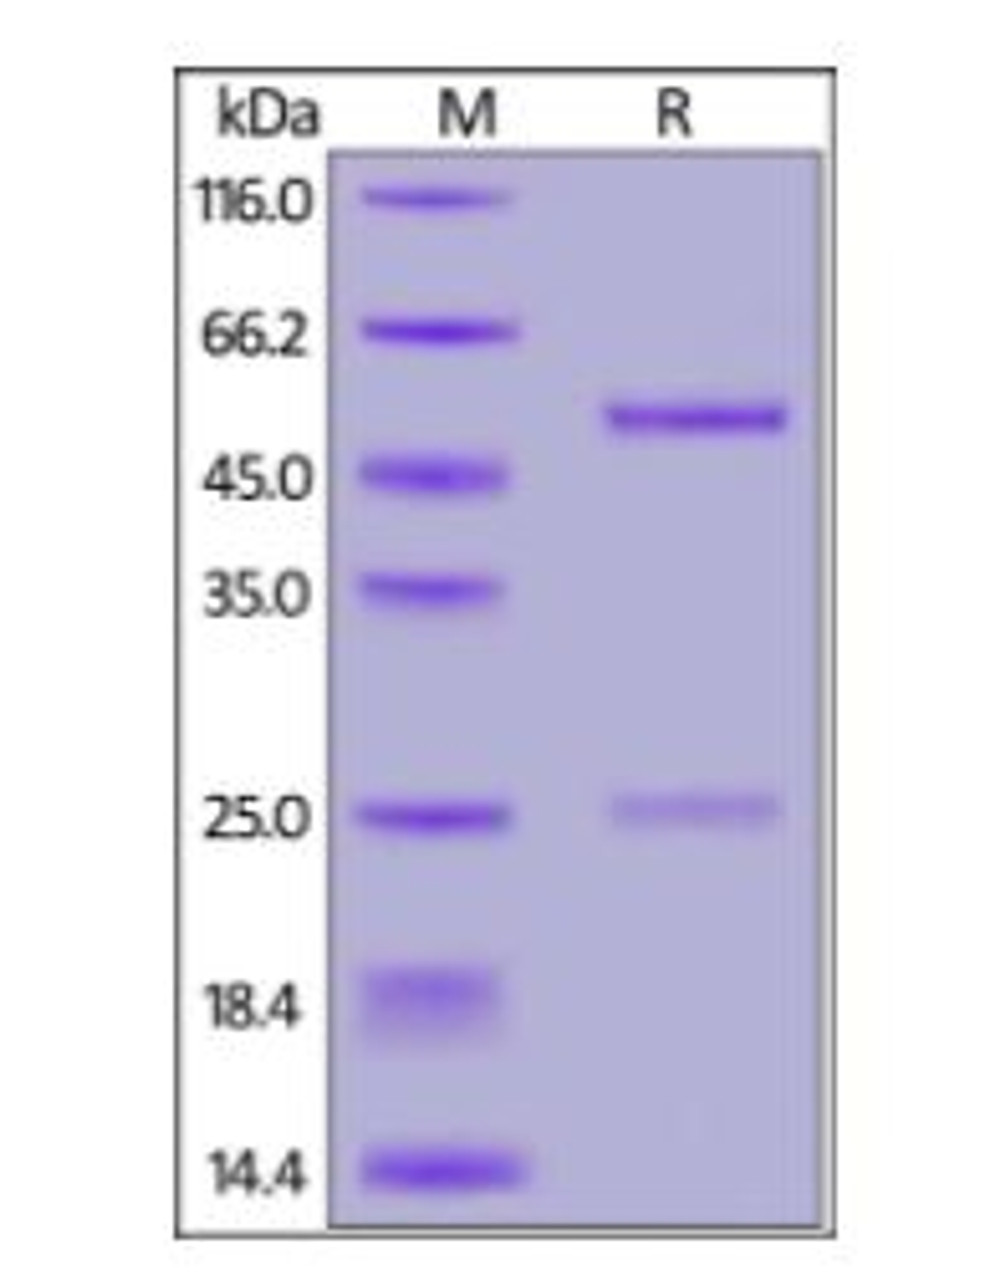 Anti-SARS-CoV-2 RBD Neutralizing Antibody, Human IgG1 on SDS-PAGE under reducing (R) condition. The gel was stained overnight with Coomassie Blue. The purity of the protein is greater than 95%.